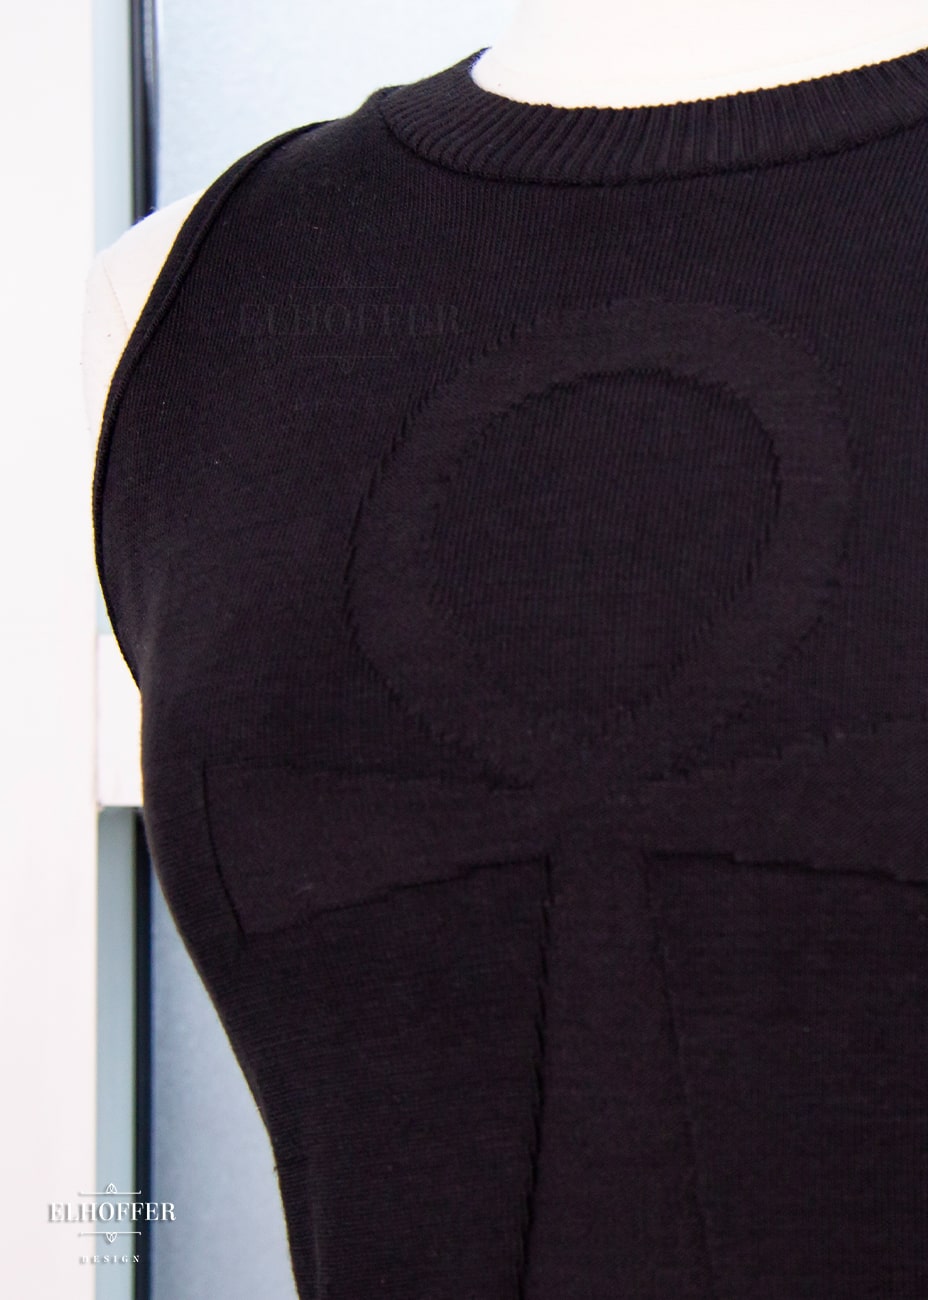 Close up of the ankh design on the front of the crop top.